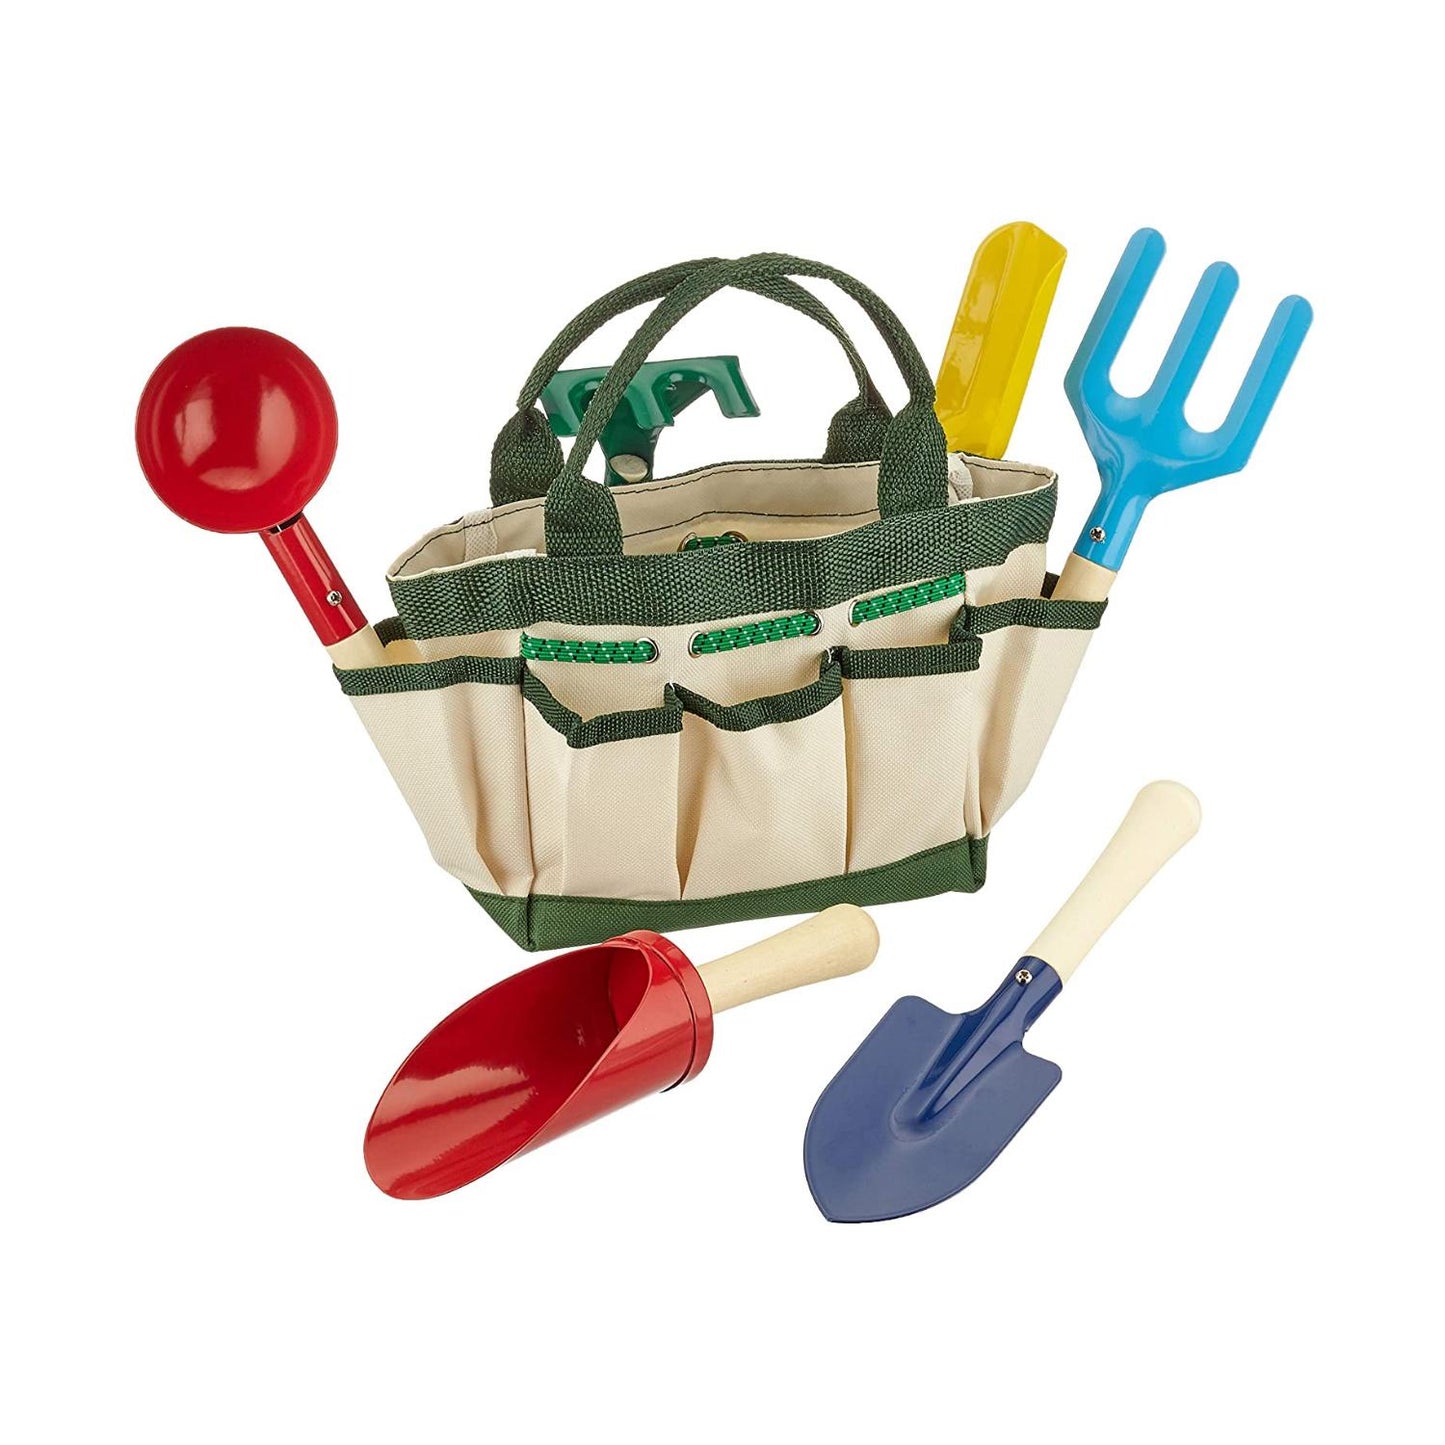 Legler Toys Kids Garden Tools or Beach Toy Set with Carry Bag | Outdoor & Gardening | Front View – 2 Shovels Outside Bag | BeoVERDE.ie